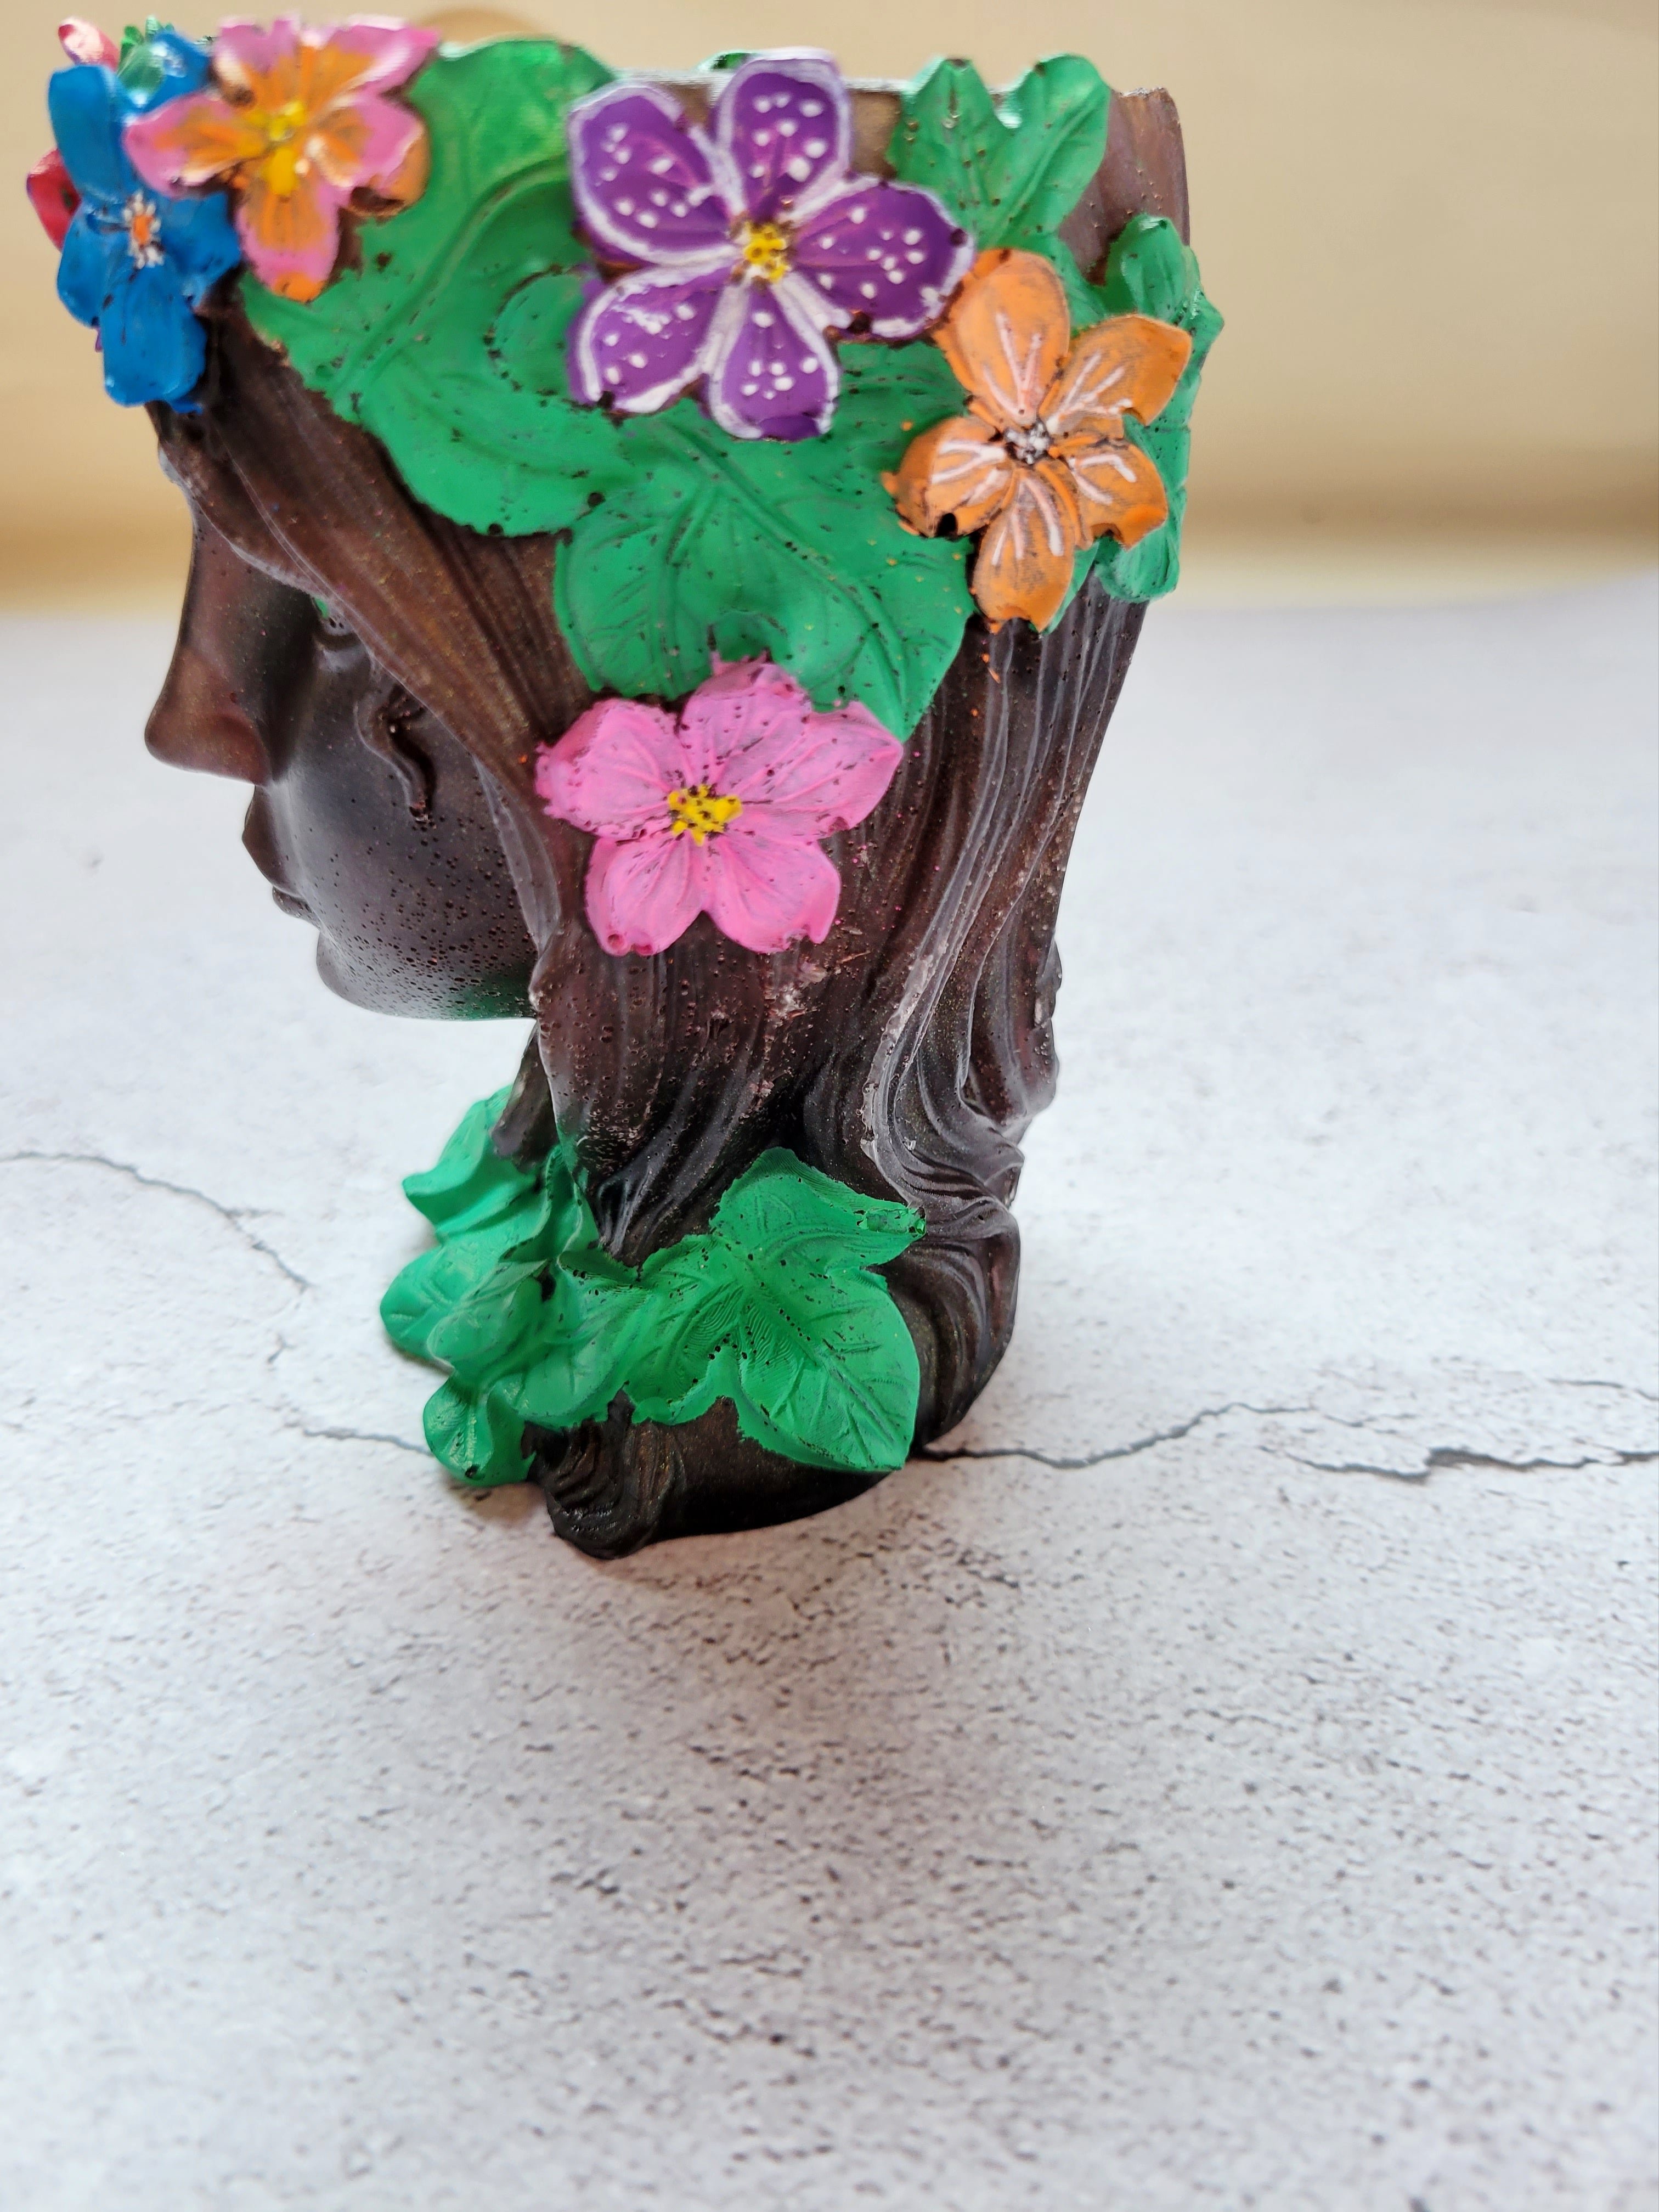 brownish bronze colored resin woman's face with green eyes, green ivy around her neck, a golden stem crown filled with colorful flowers. Side view